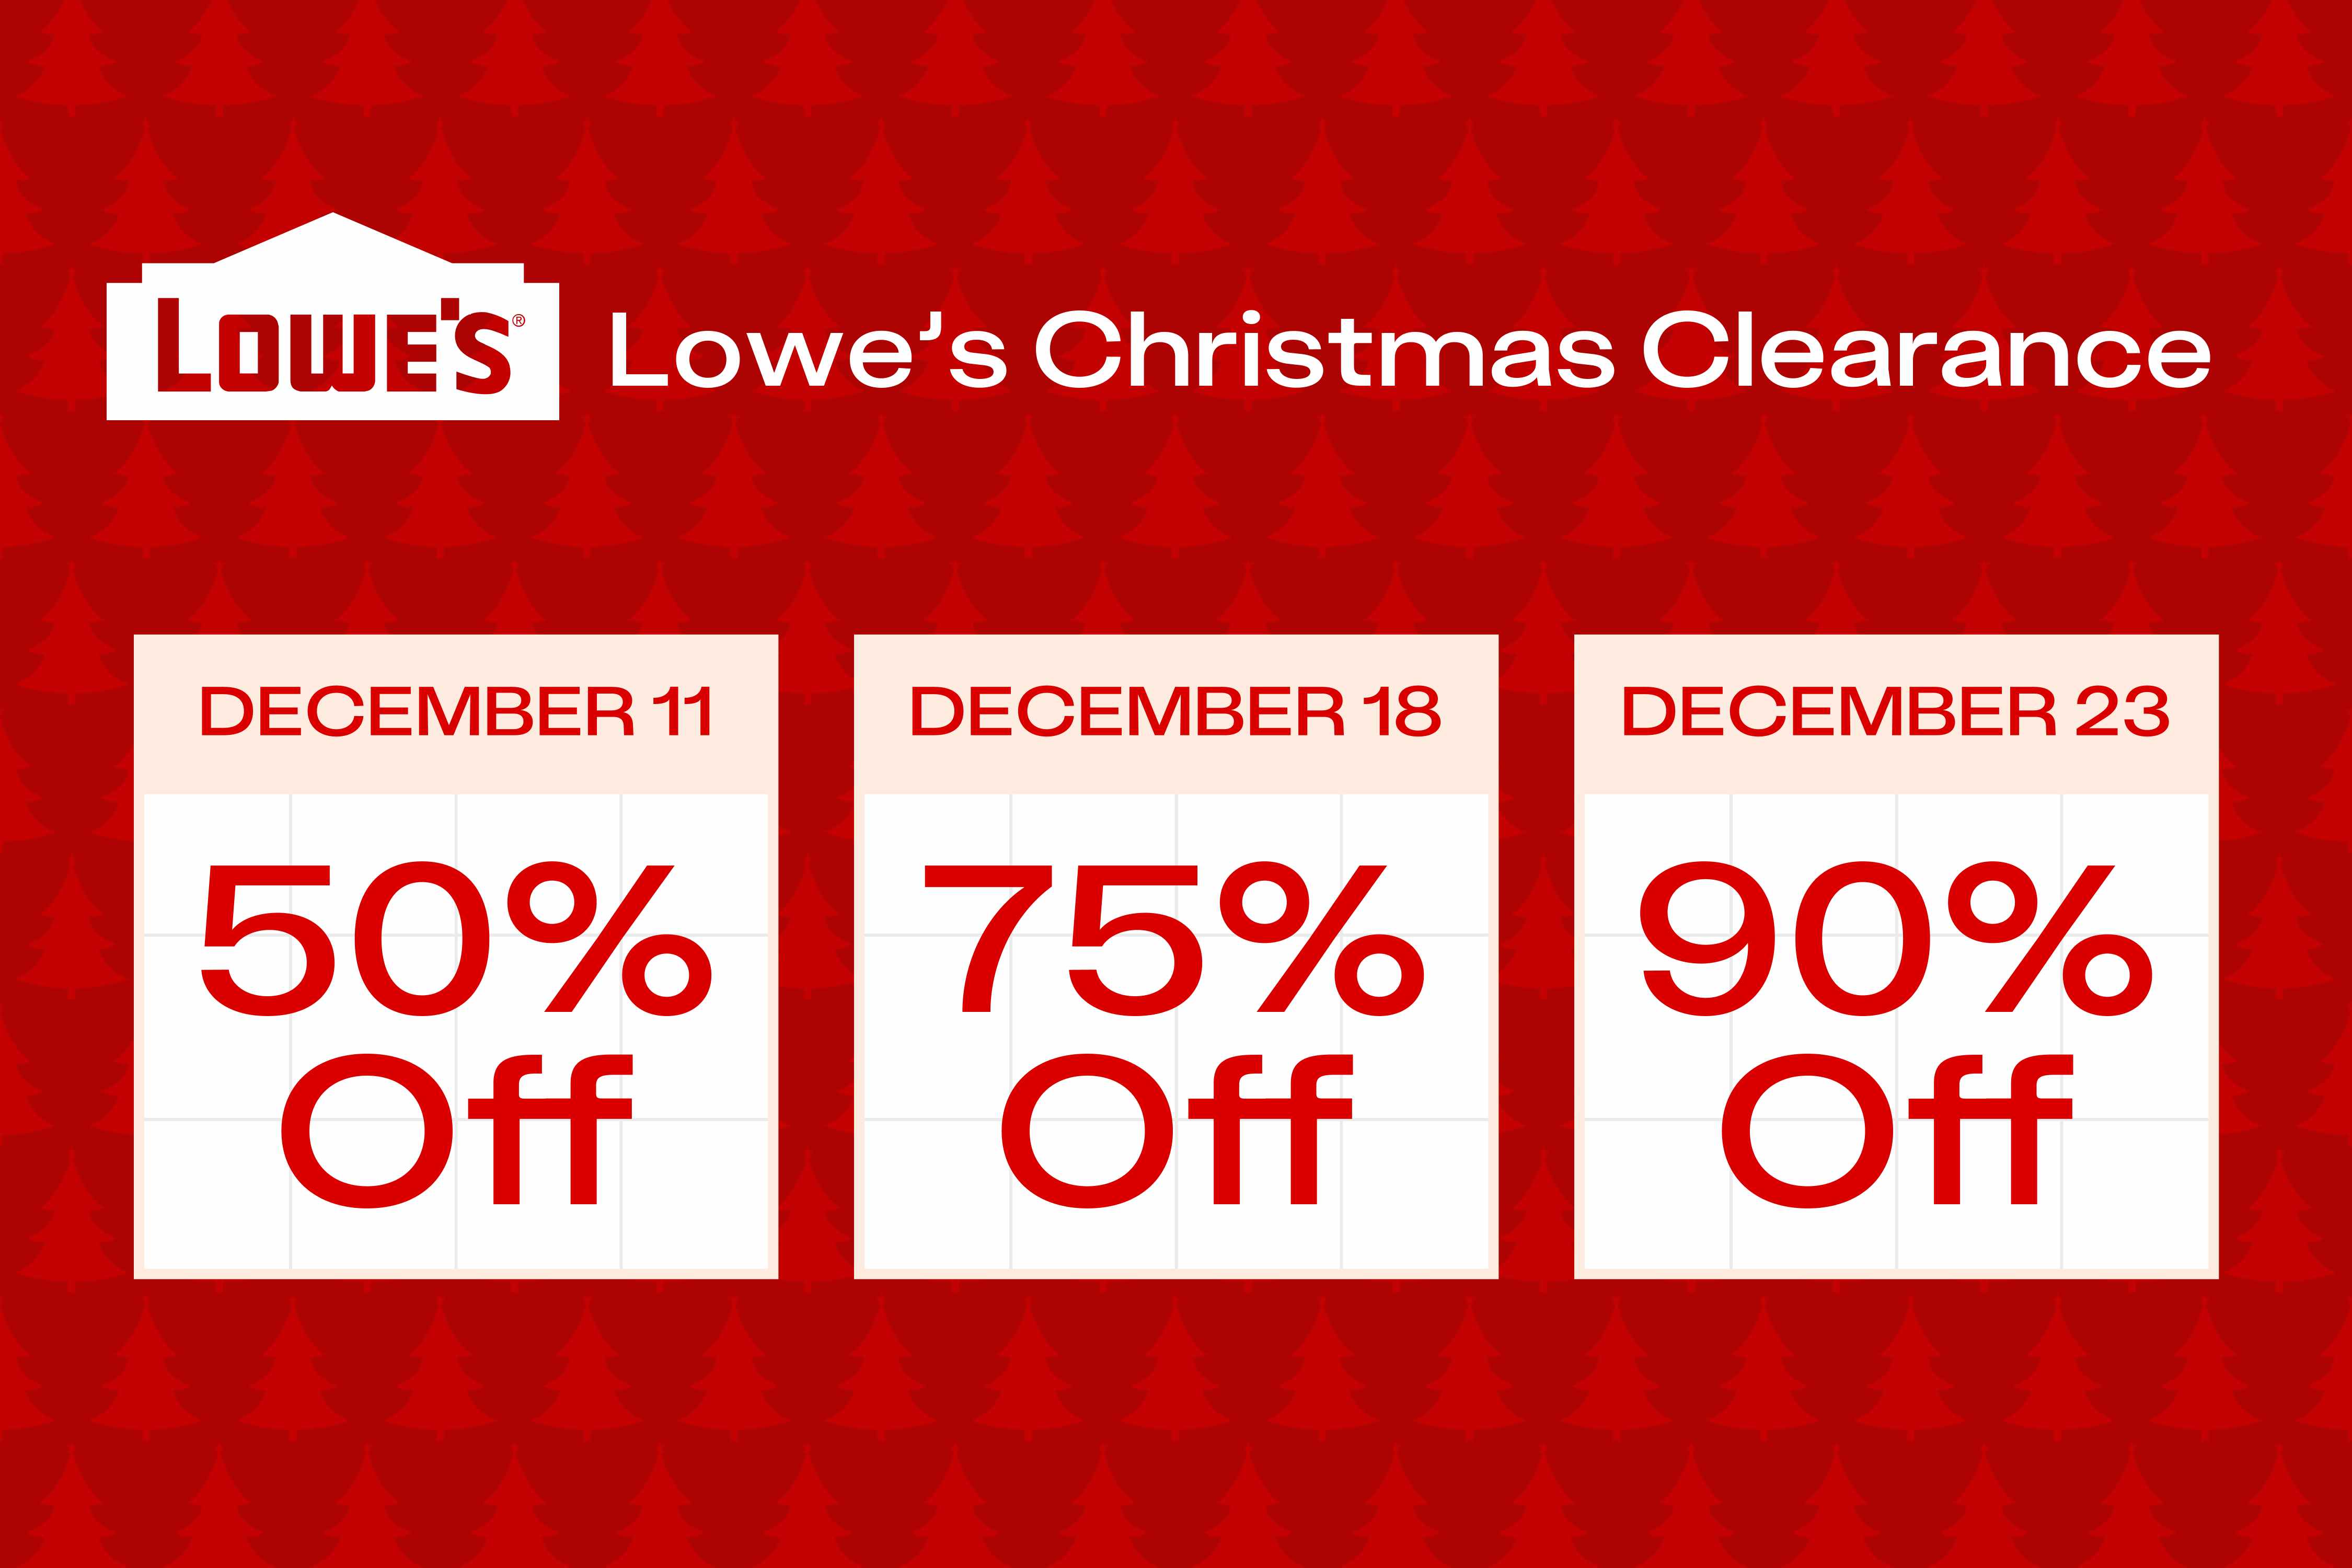 Lowes Christmas Clearance